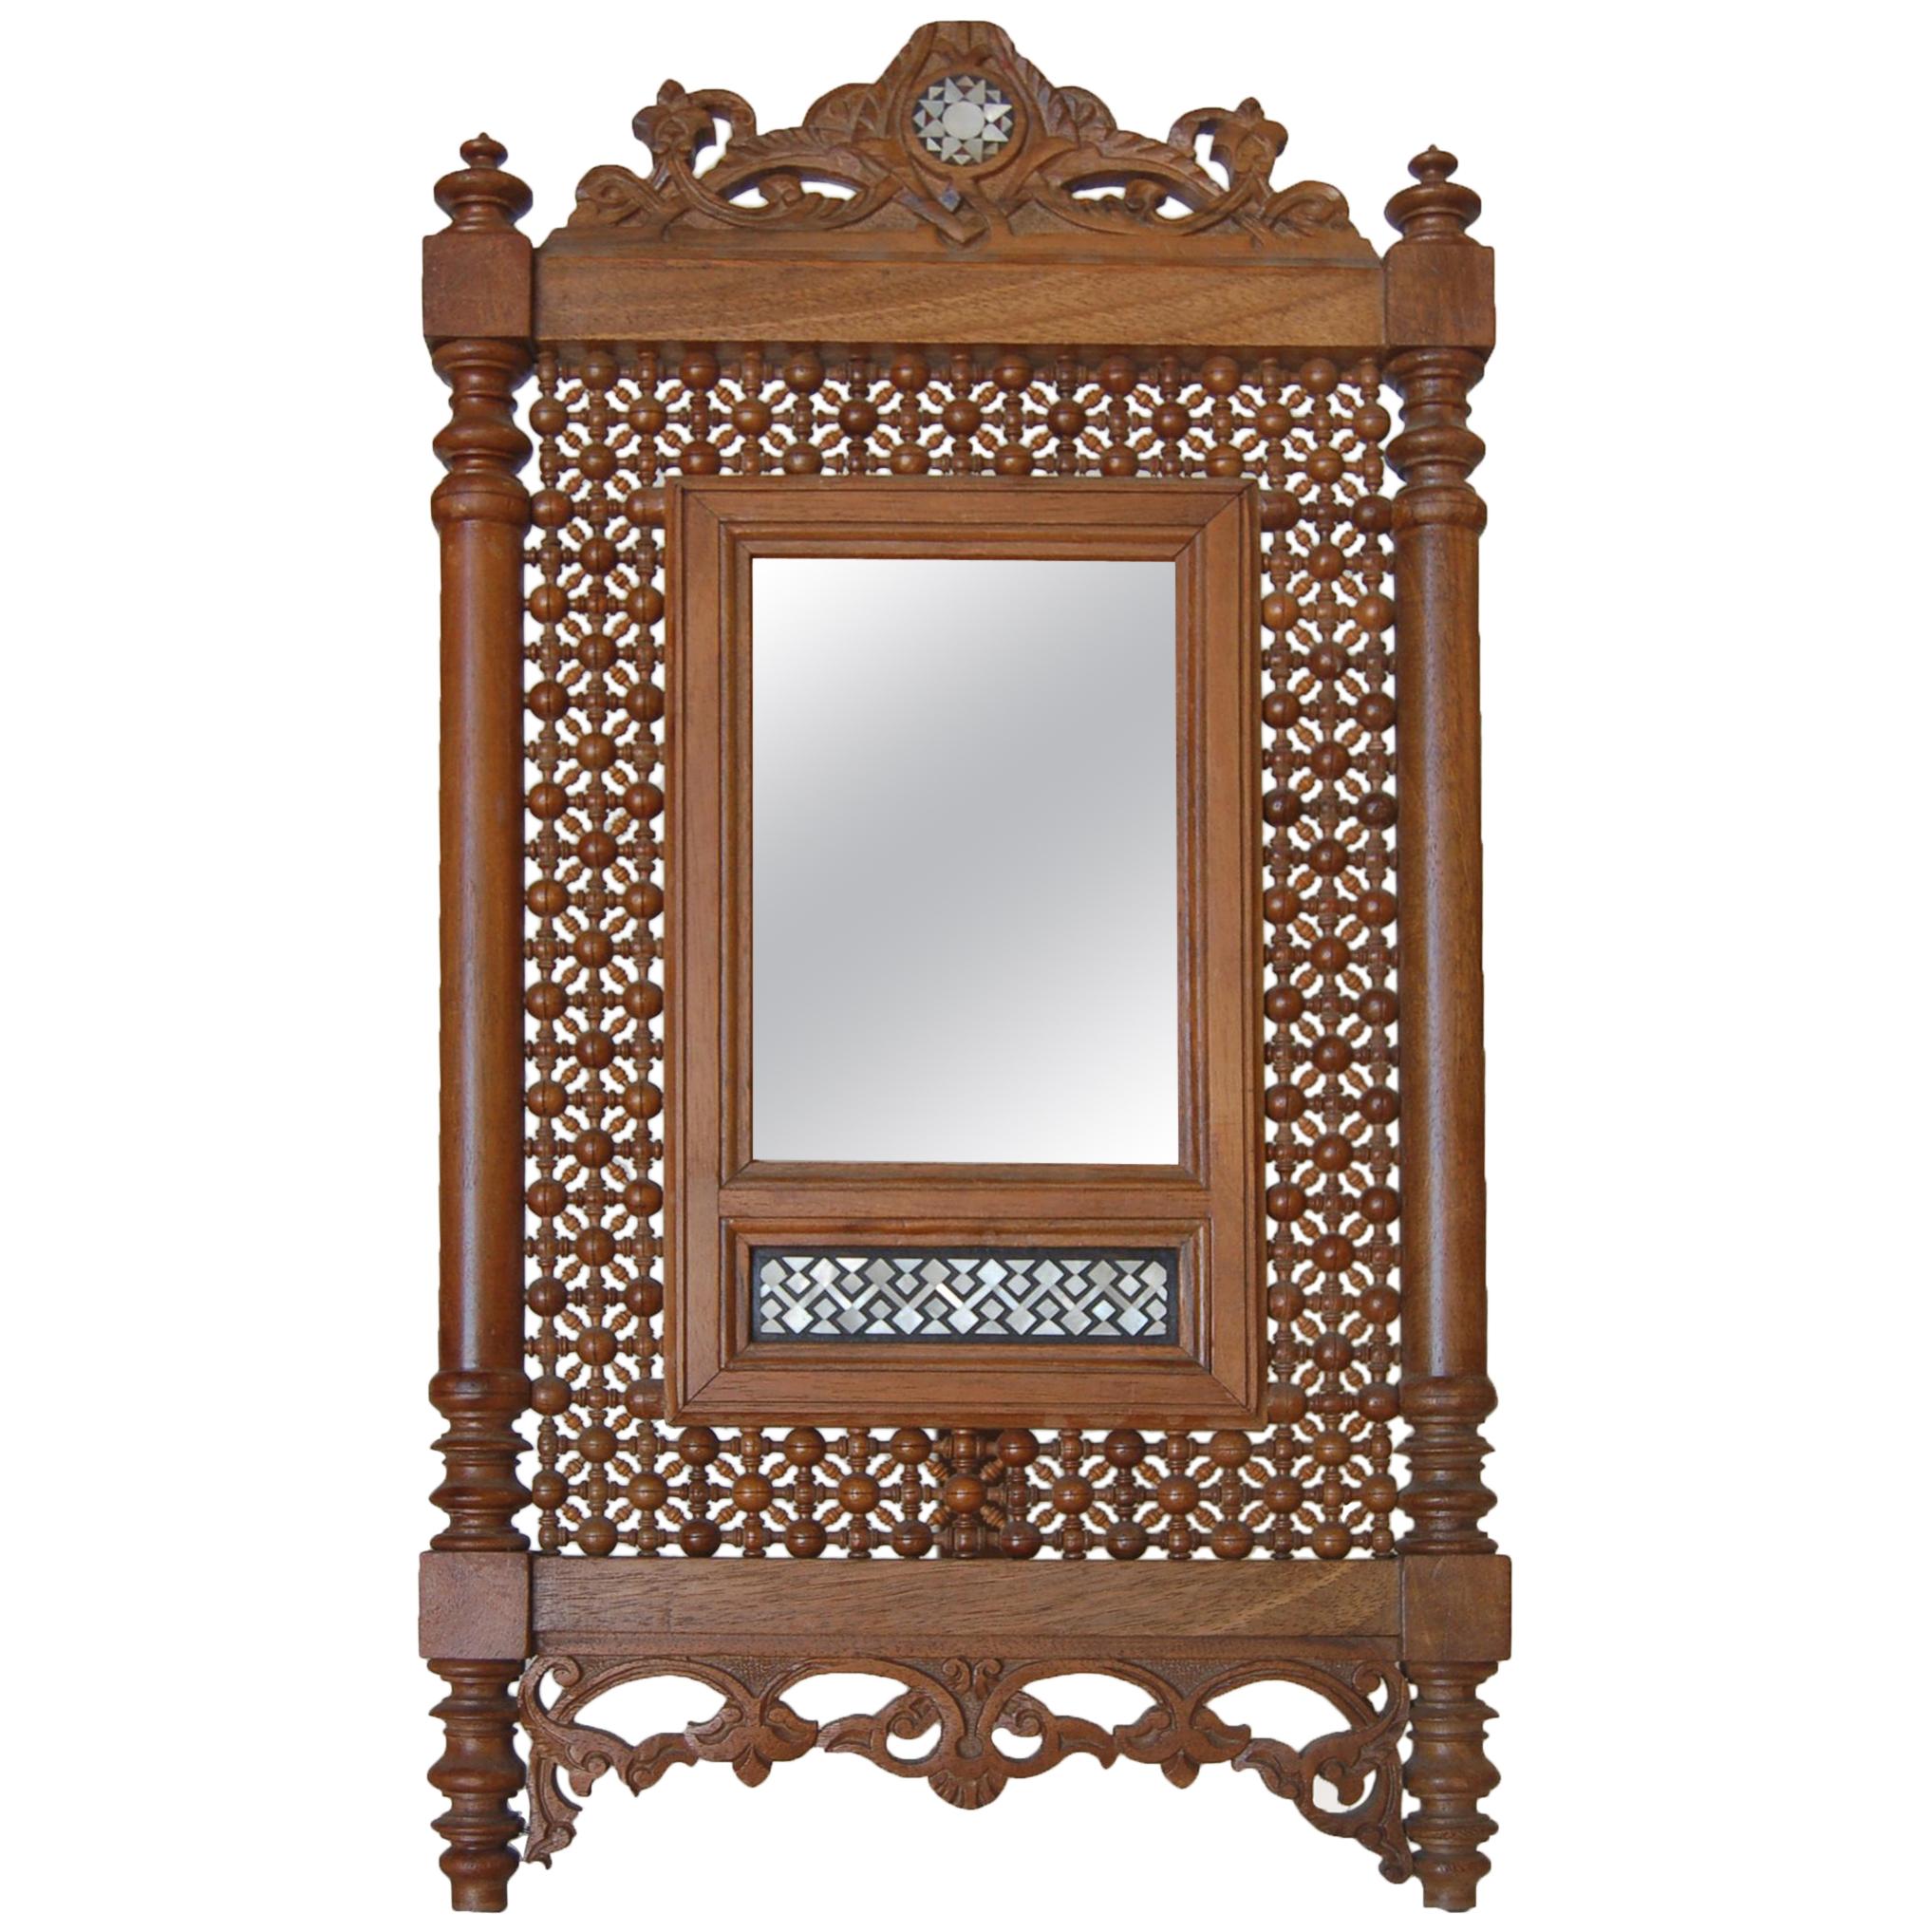 Carved Teak Mirror with Mother of Pearl